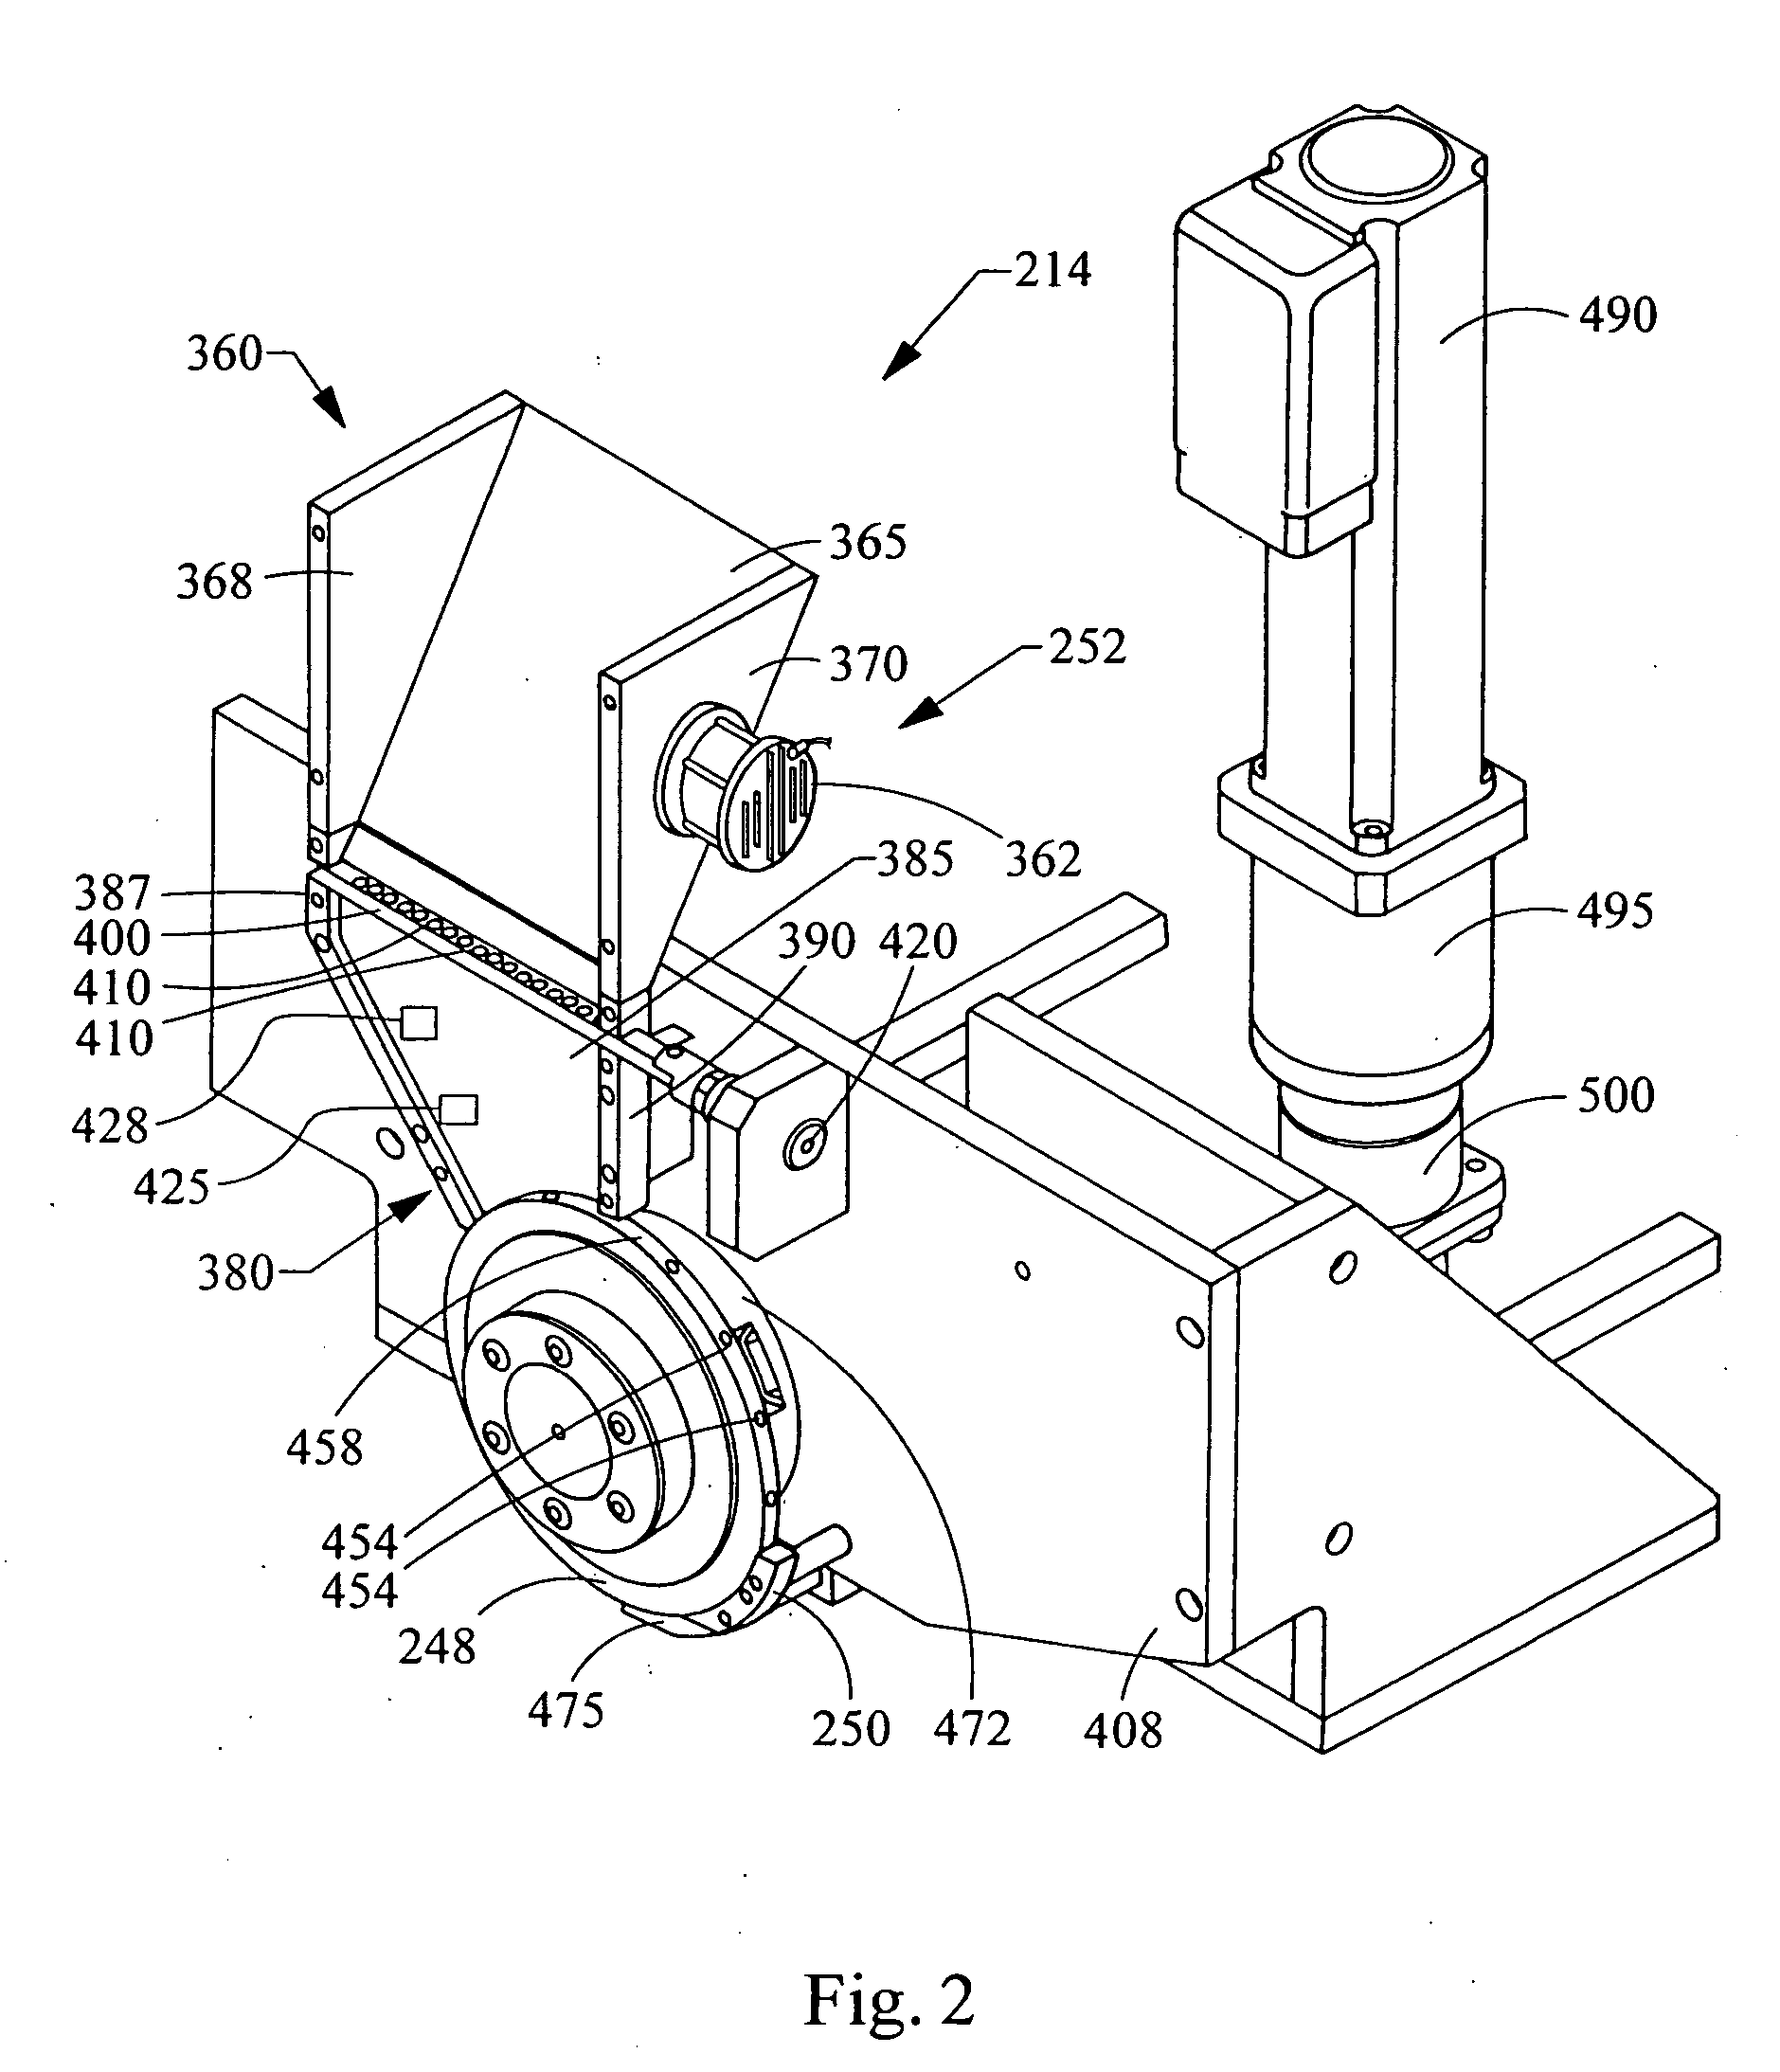 Equipment for insertion of objects into smoking articles